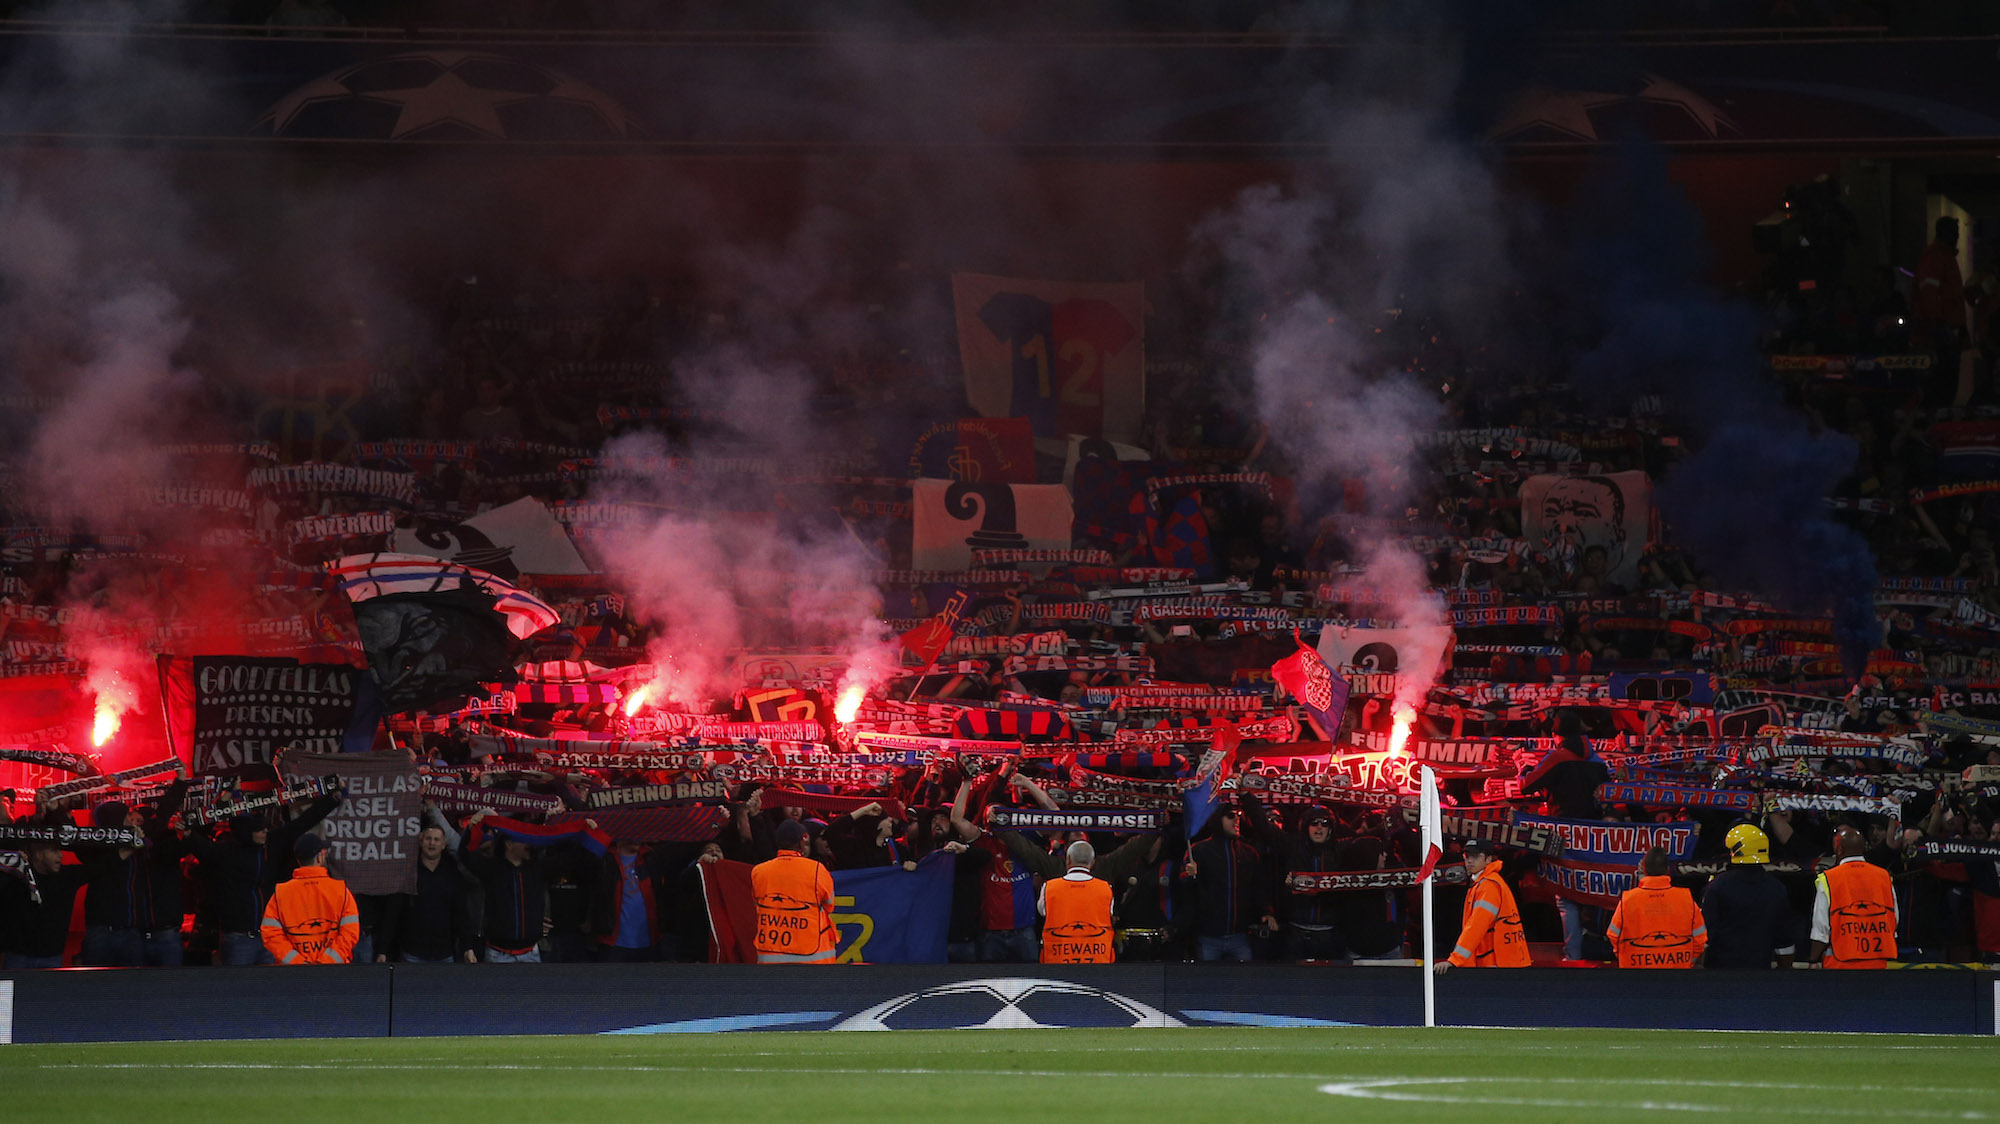 Britain Soccer Football - Arsenal v FC Basel - UEFA Champions League Group Stage - Group A - Emirates Stadium, London, England - 28/9/16 FC Basel fans with flares Action Images via Reuters / Andrew Couldridge Livepic EDITORIAL USE ONLY.